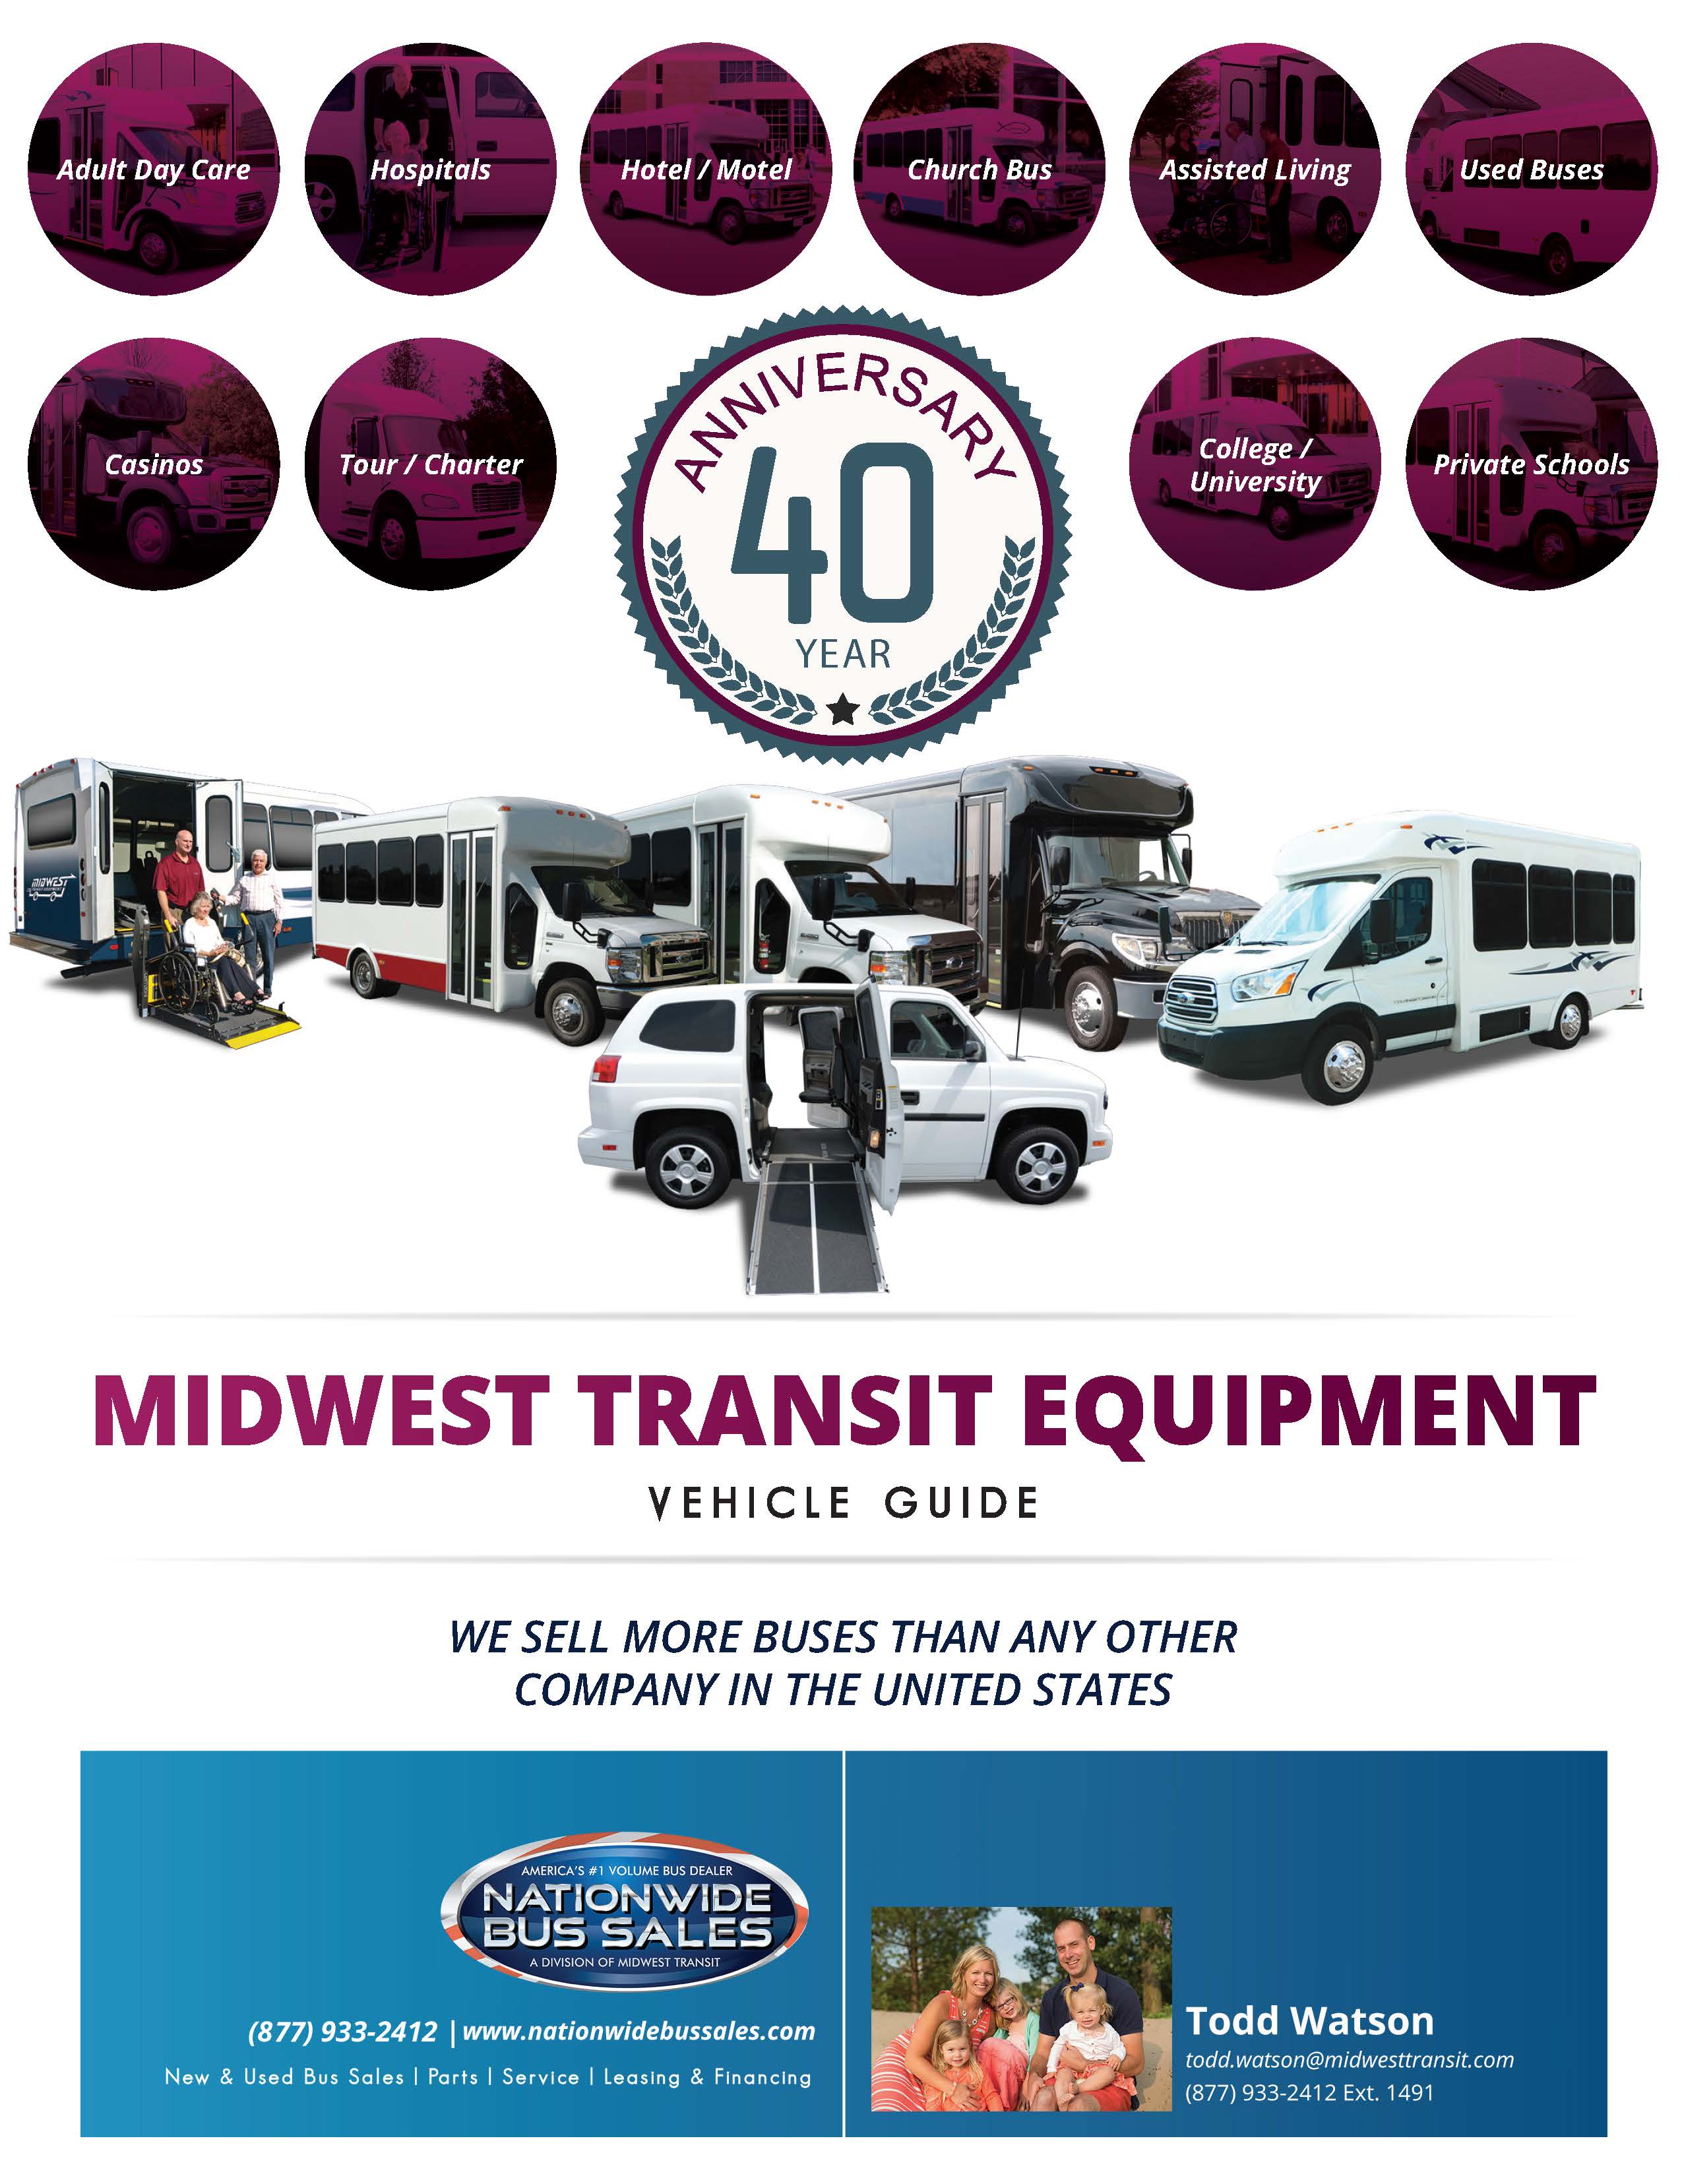 Multi-Vehicle-Brochure-UNIVERSAL-TODDW.-nw_Page_1